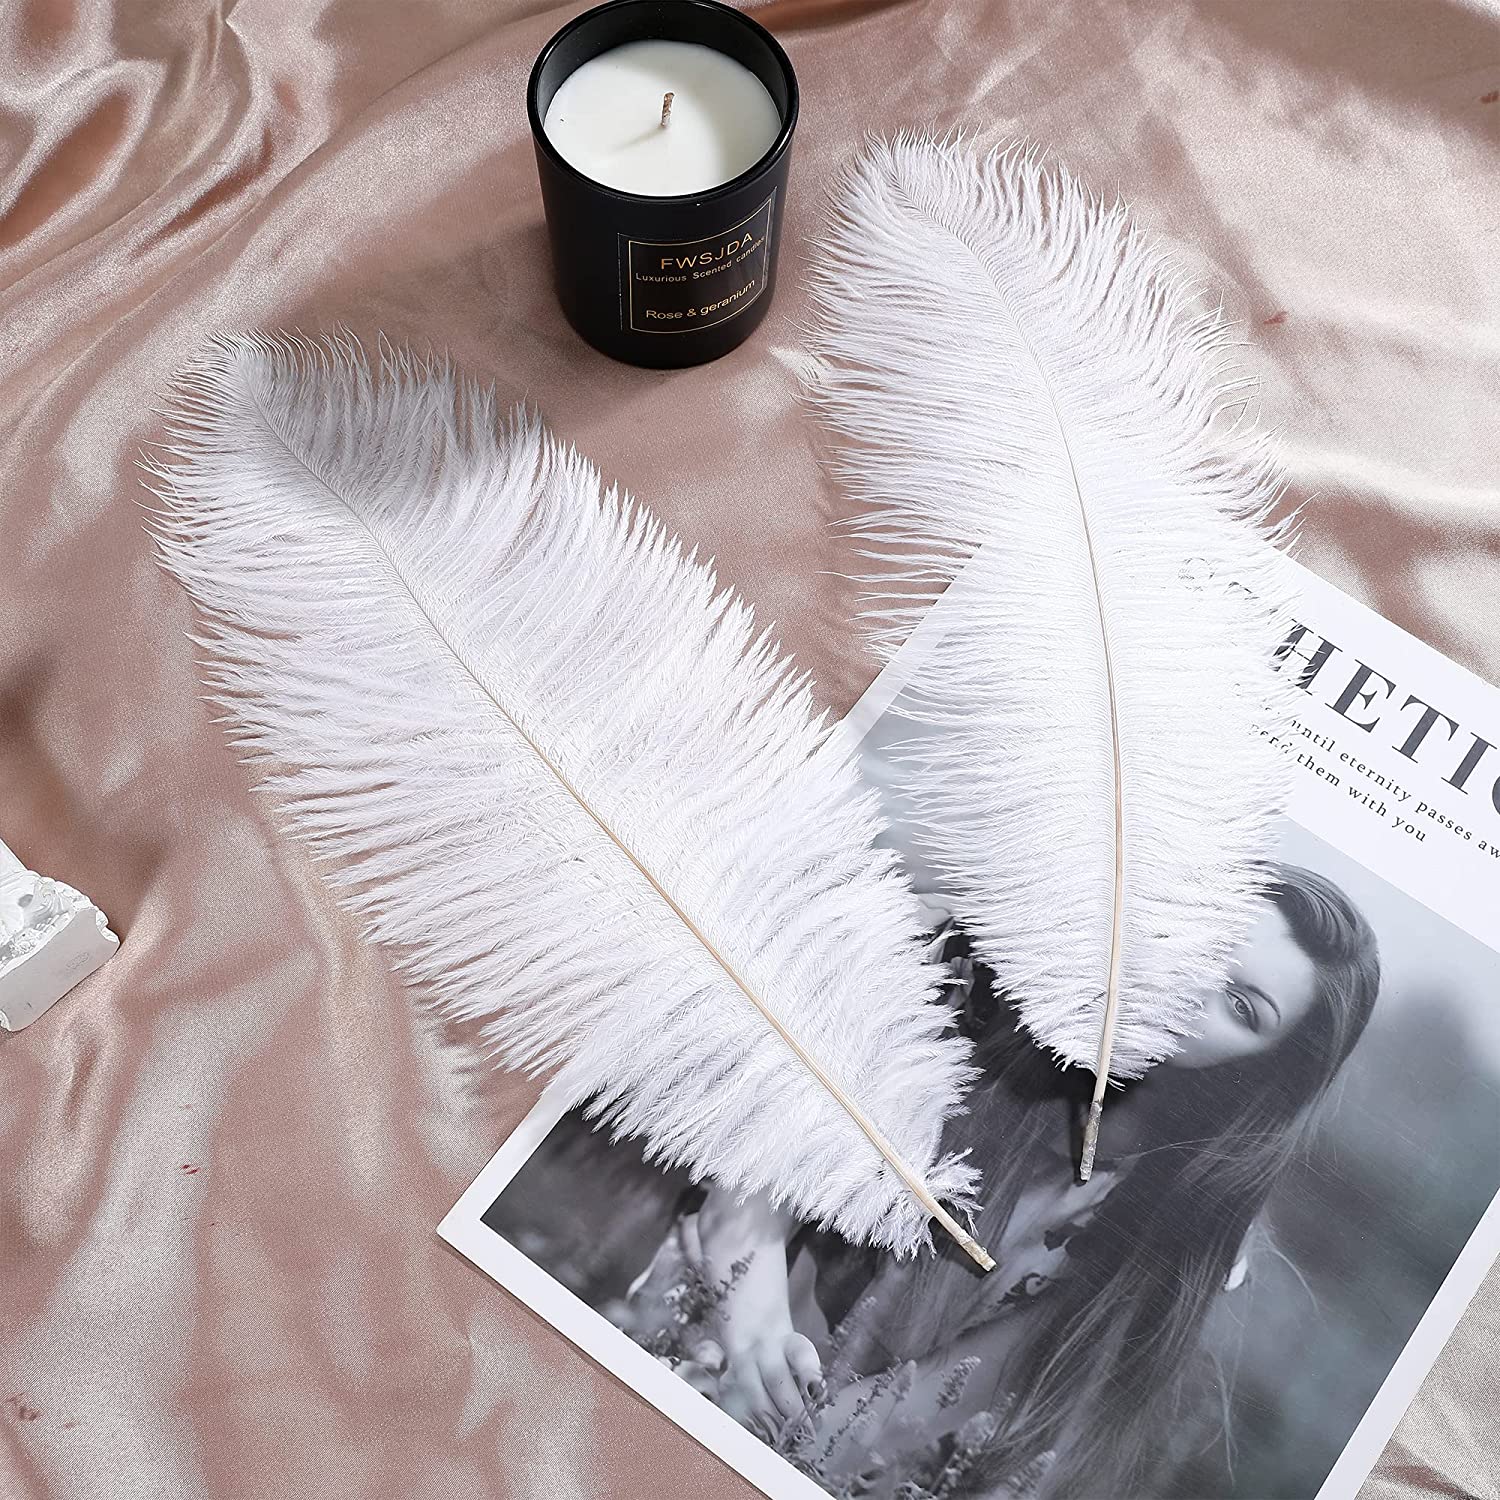 Bulk Ostrich Feathers - White Ostrich Feathers 